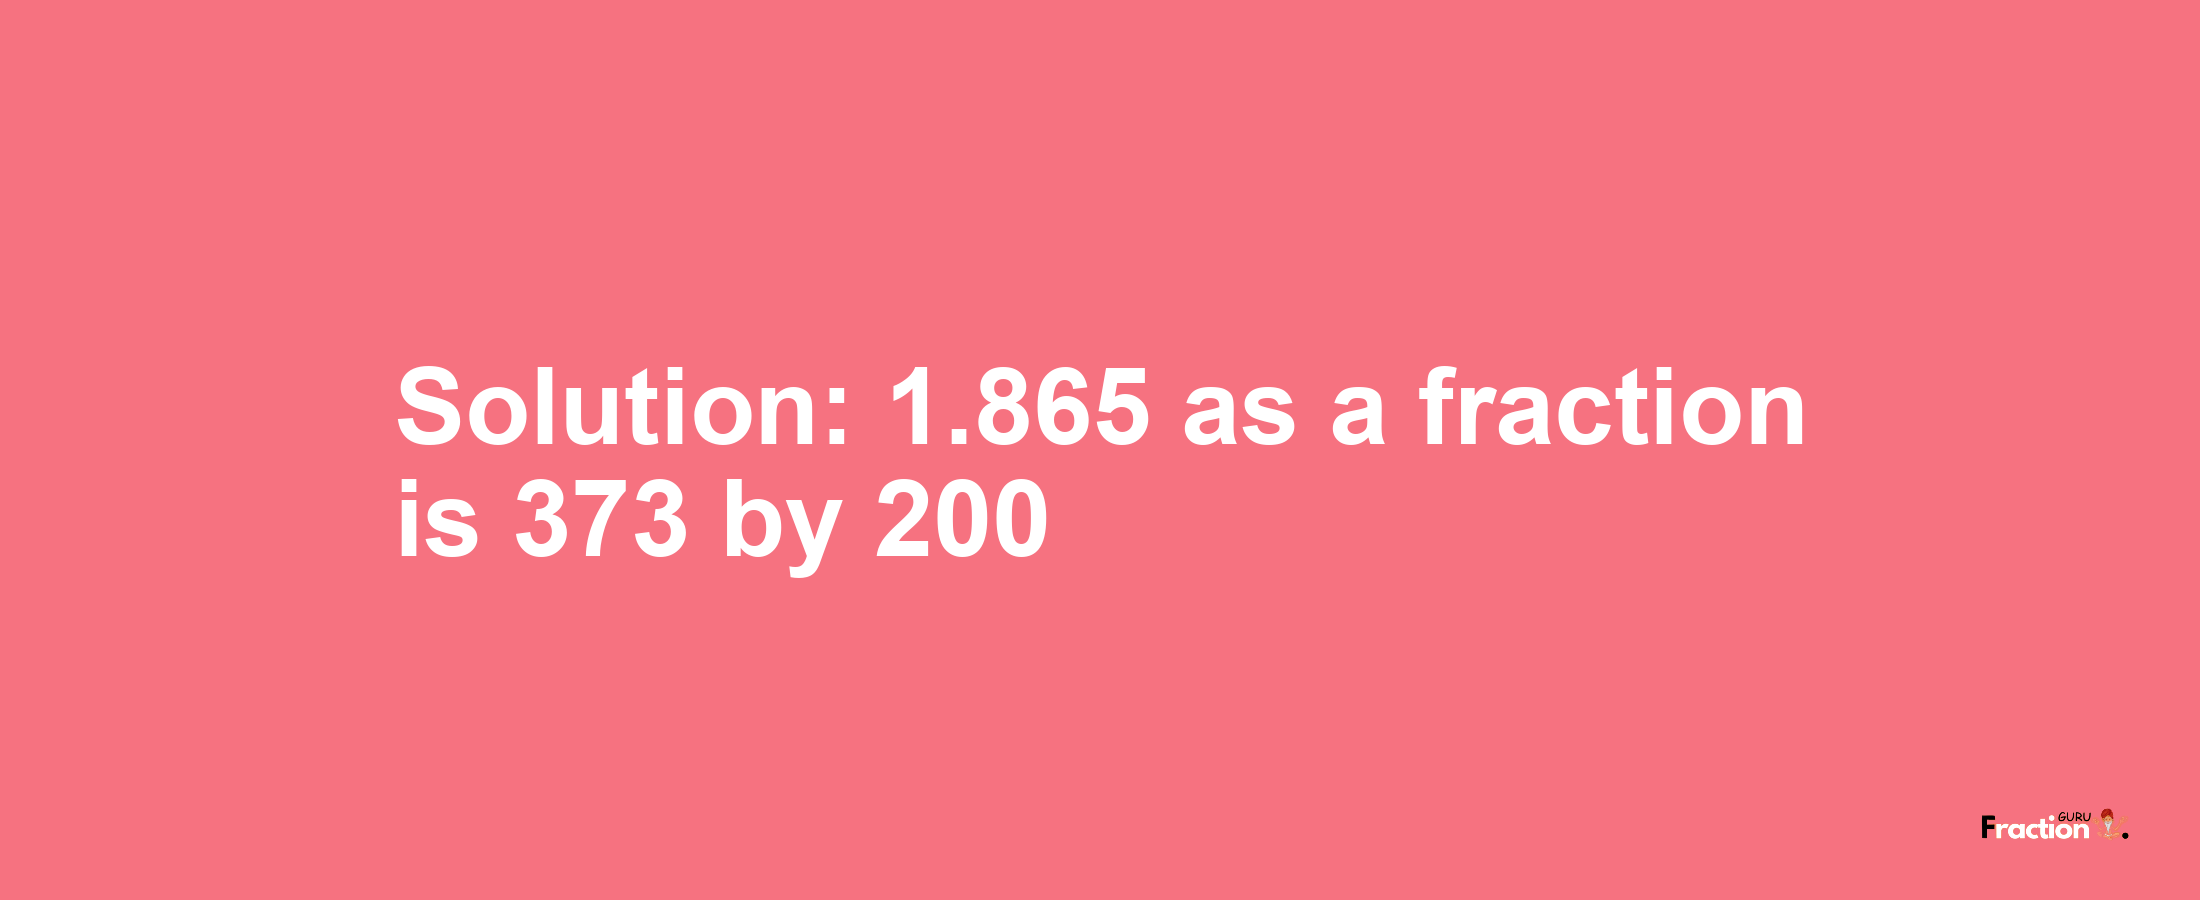 Solution:1.865 as a fraction is 373/200